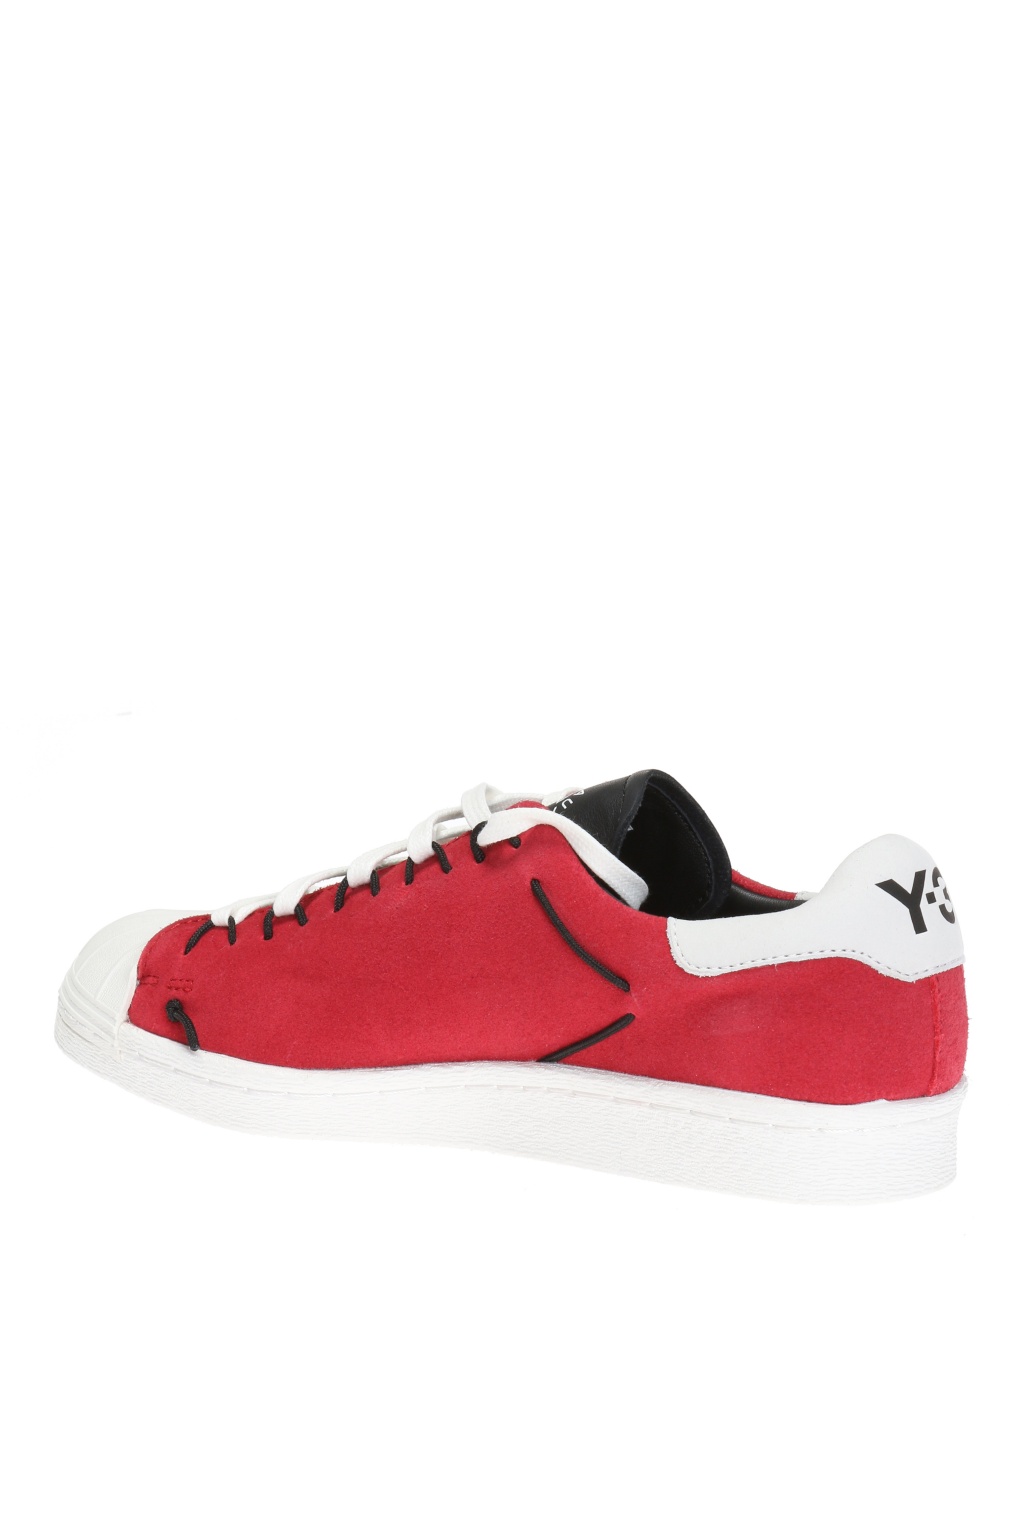 y3 super knot red